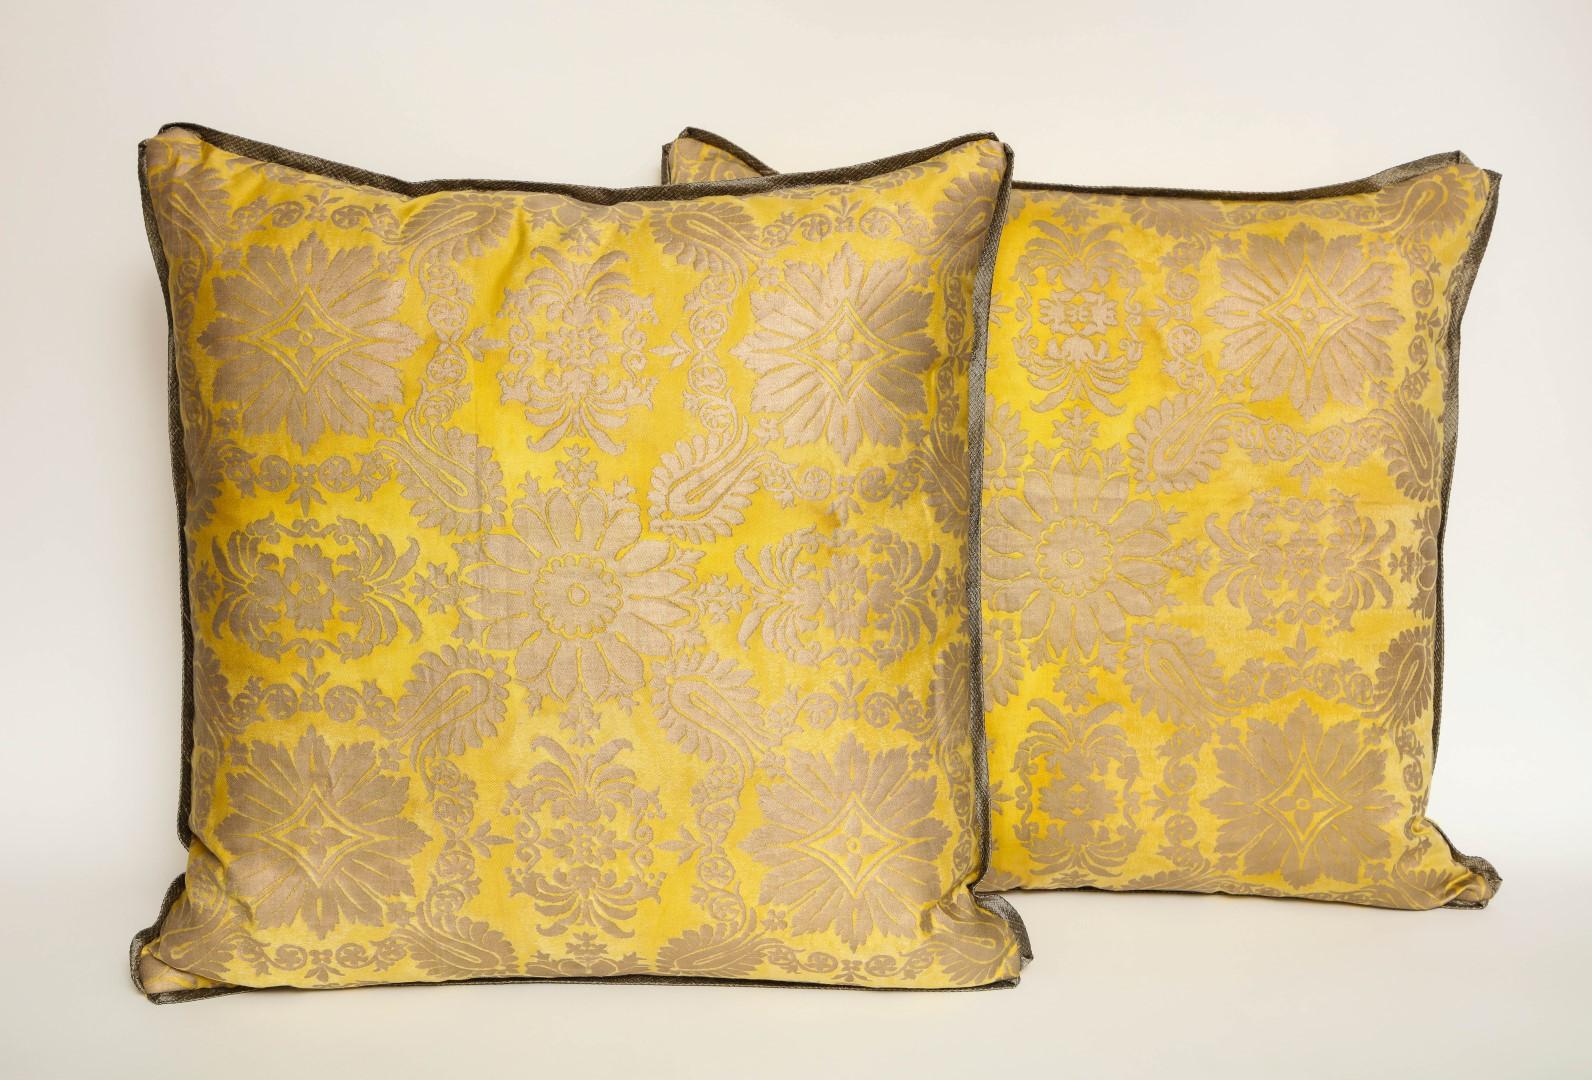 North American Fortuny Fabric Cushions in the Impero Pattern